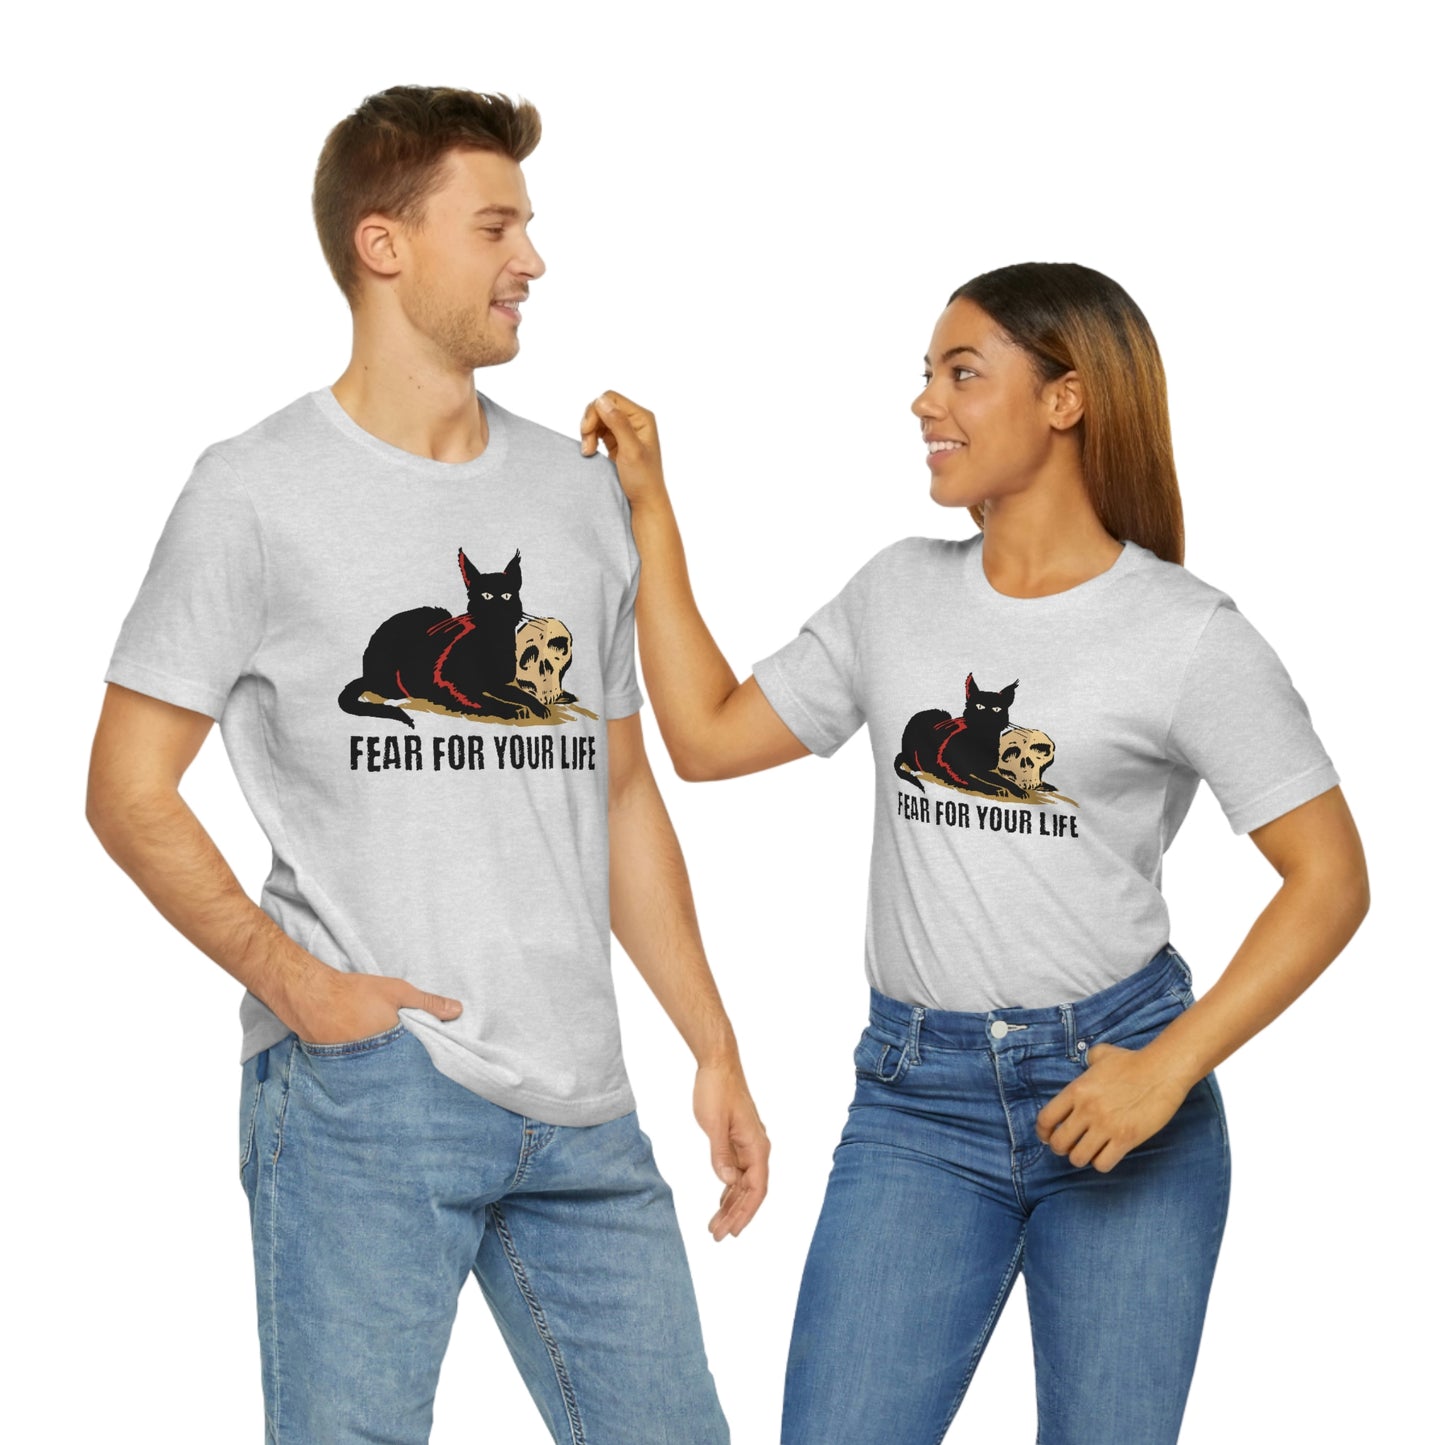 Black cat says fear for your life T-shirt